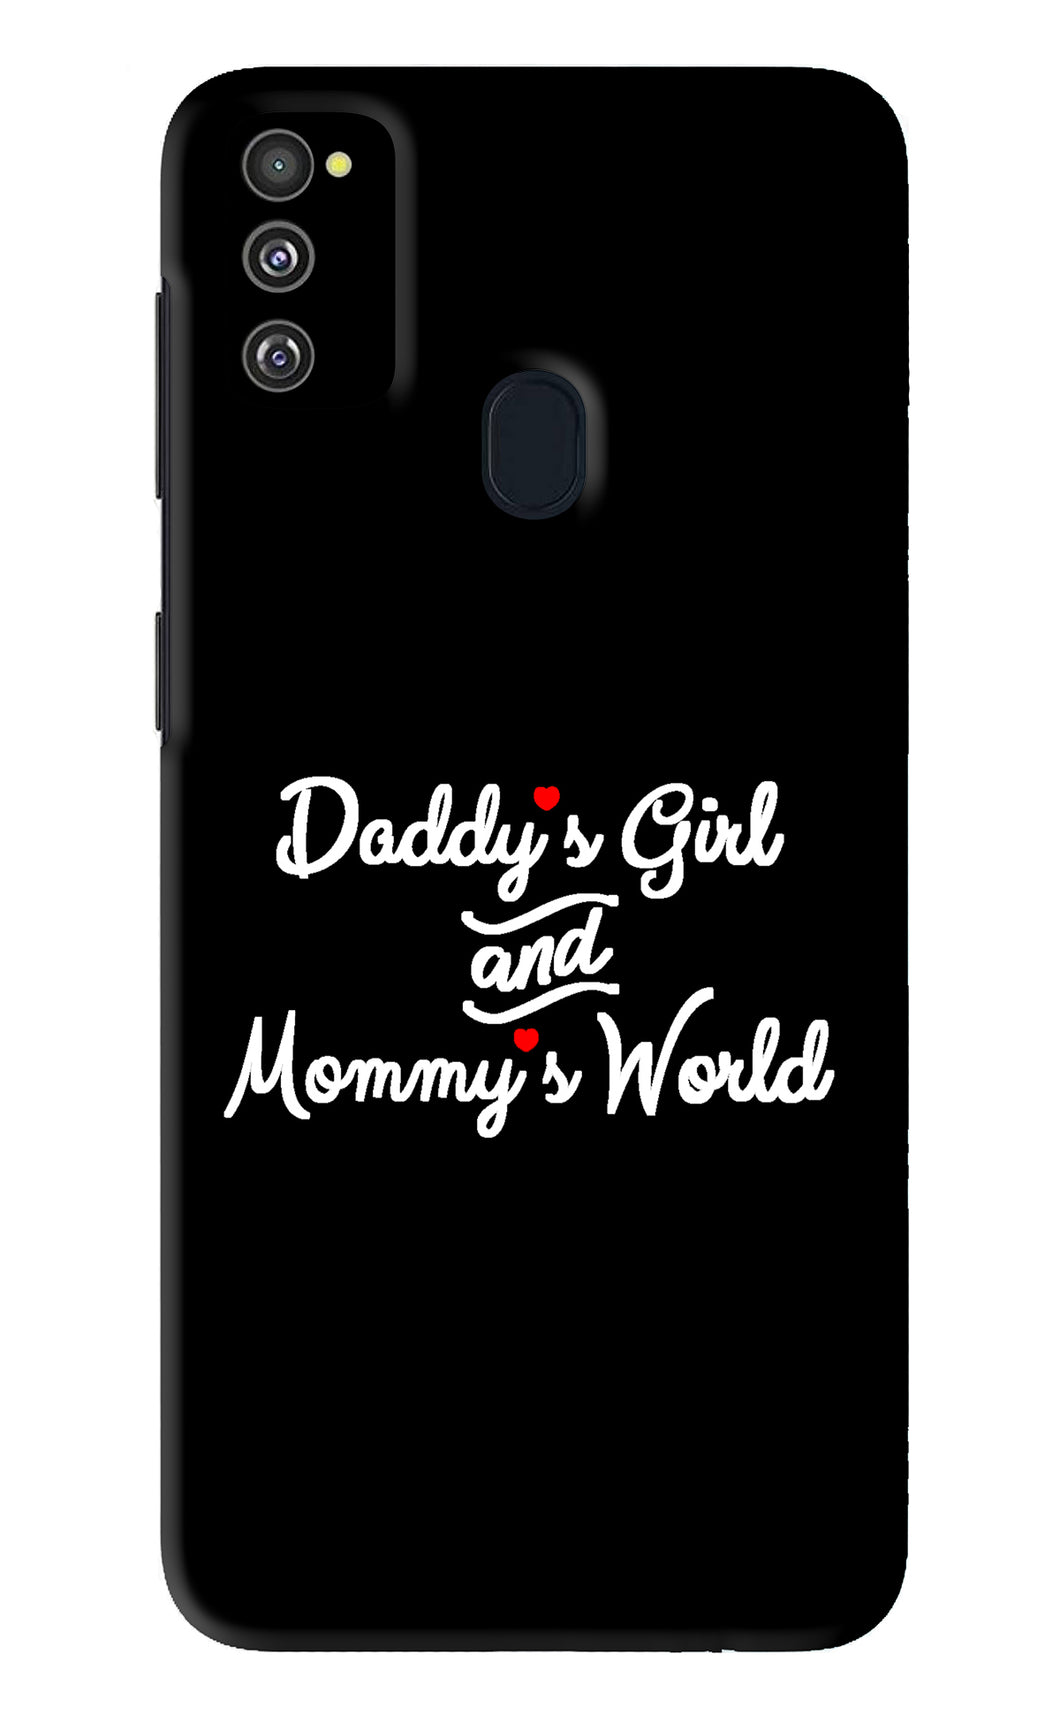 Daddy's Girl and Mommy's World Samsung Galaxy M21 Back Skin Wrap